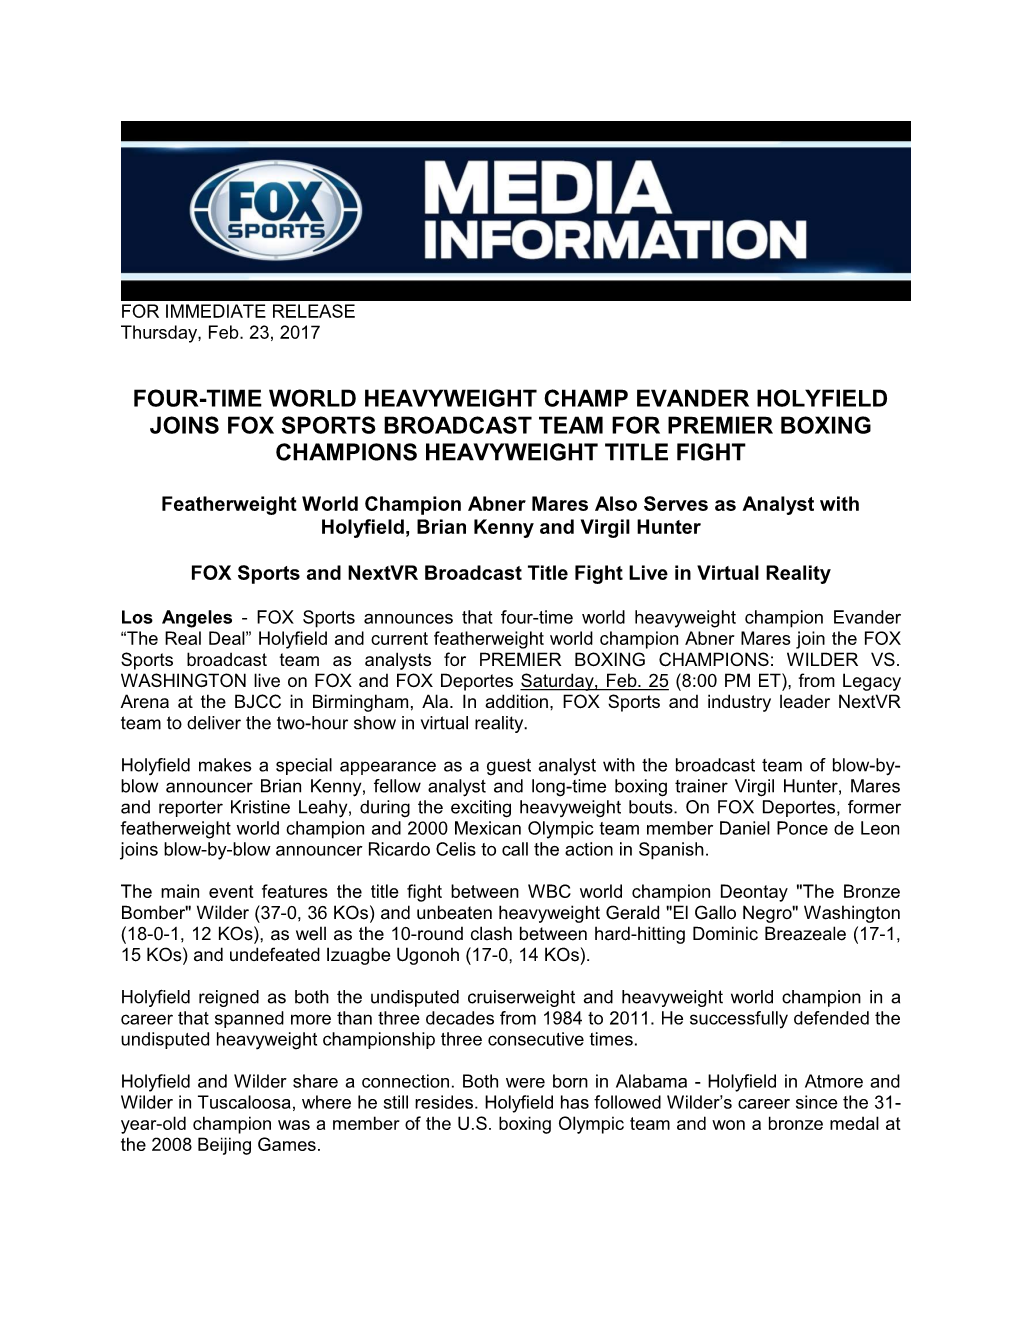 Four-Time World Heavyweight Champ Evander Holyfield Joins Fox Sports Broadcast Team for Premier Boxing Champions Heavyweight Title Fight